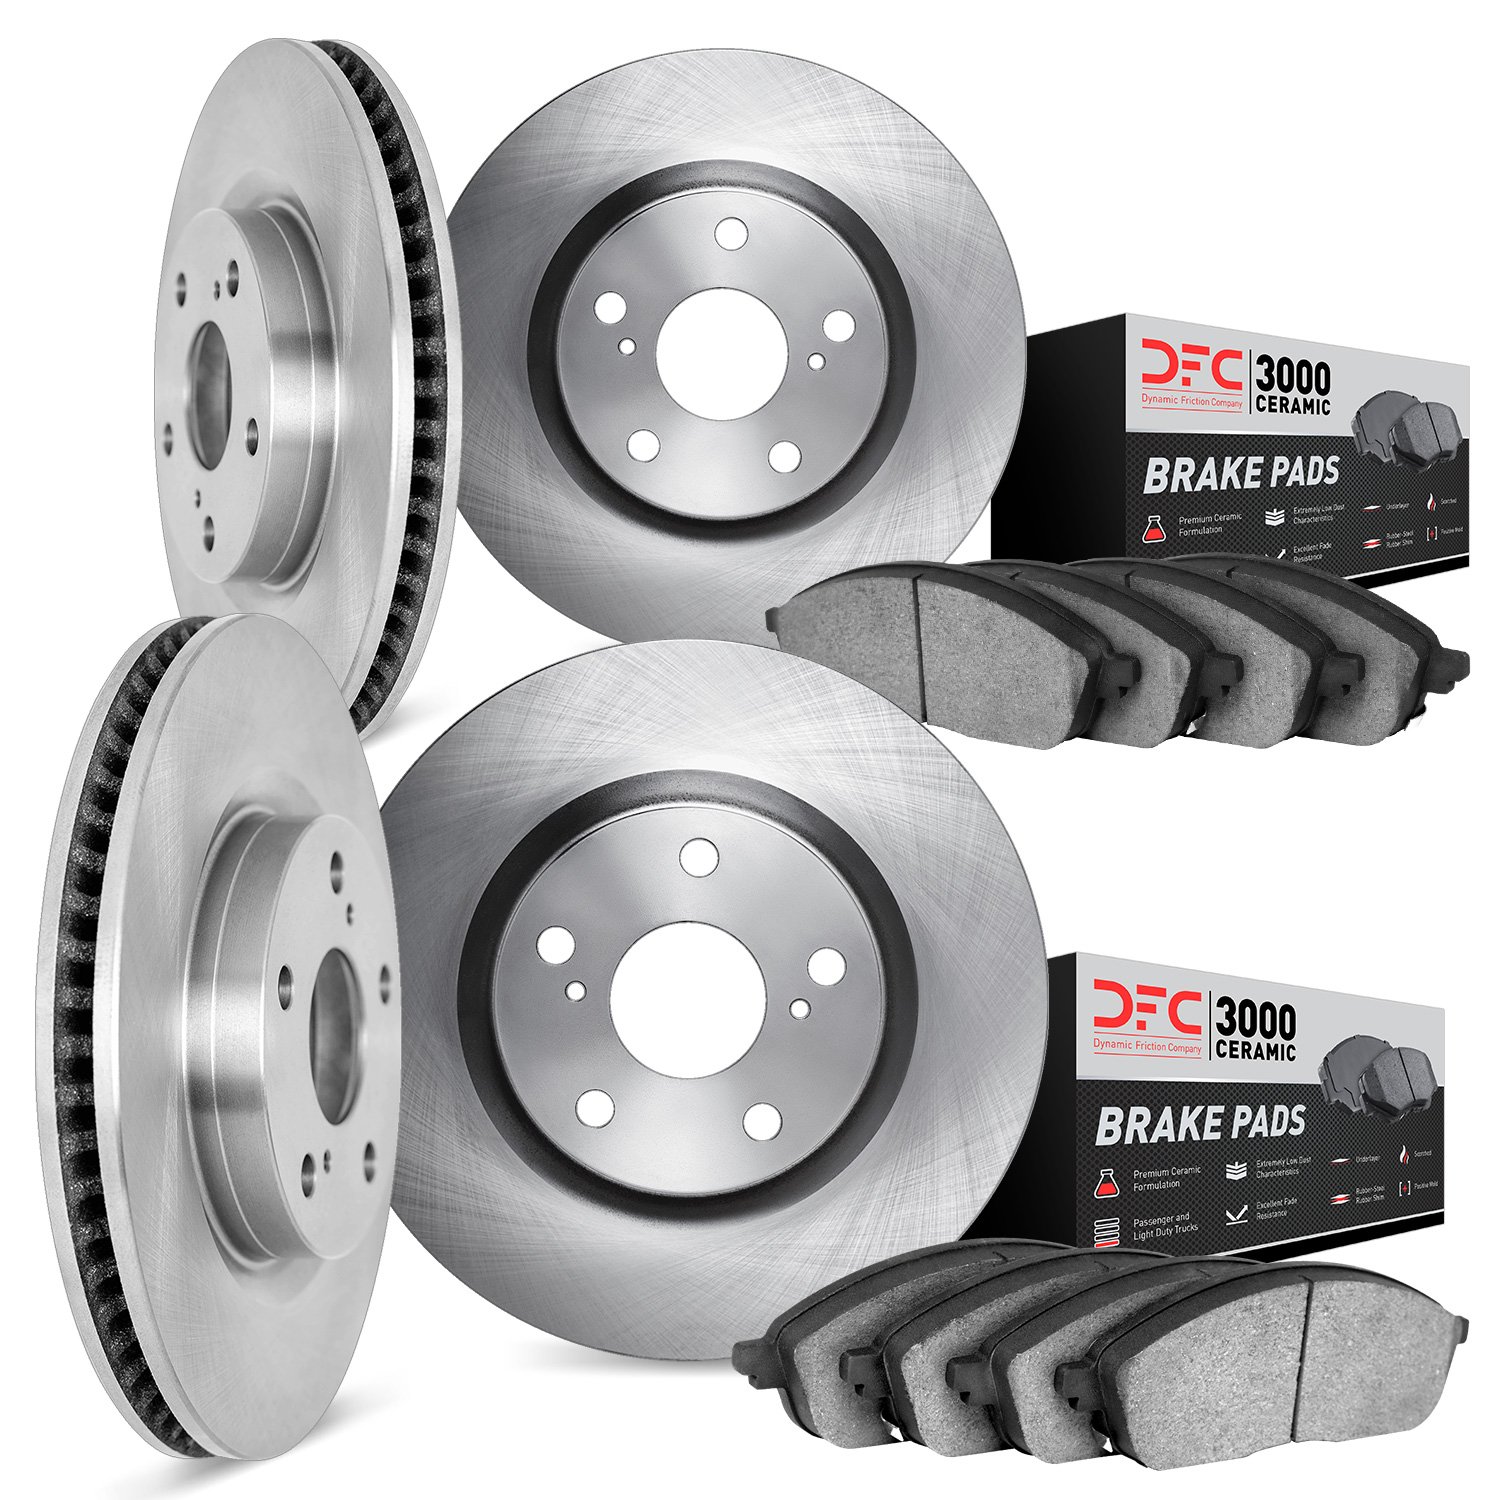 6304-67034 Brake Rotors with 3000-Series Ceramic Brake Pads Kit, 2004-2017 Infiniti/Nissan, Position: Front and Rear